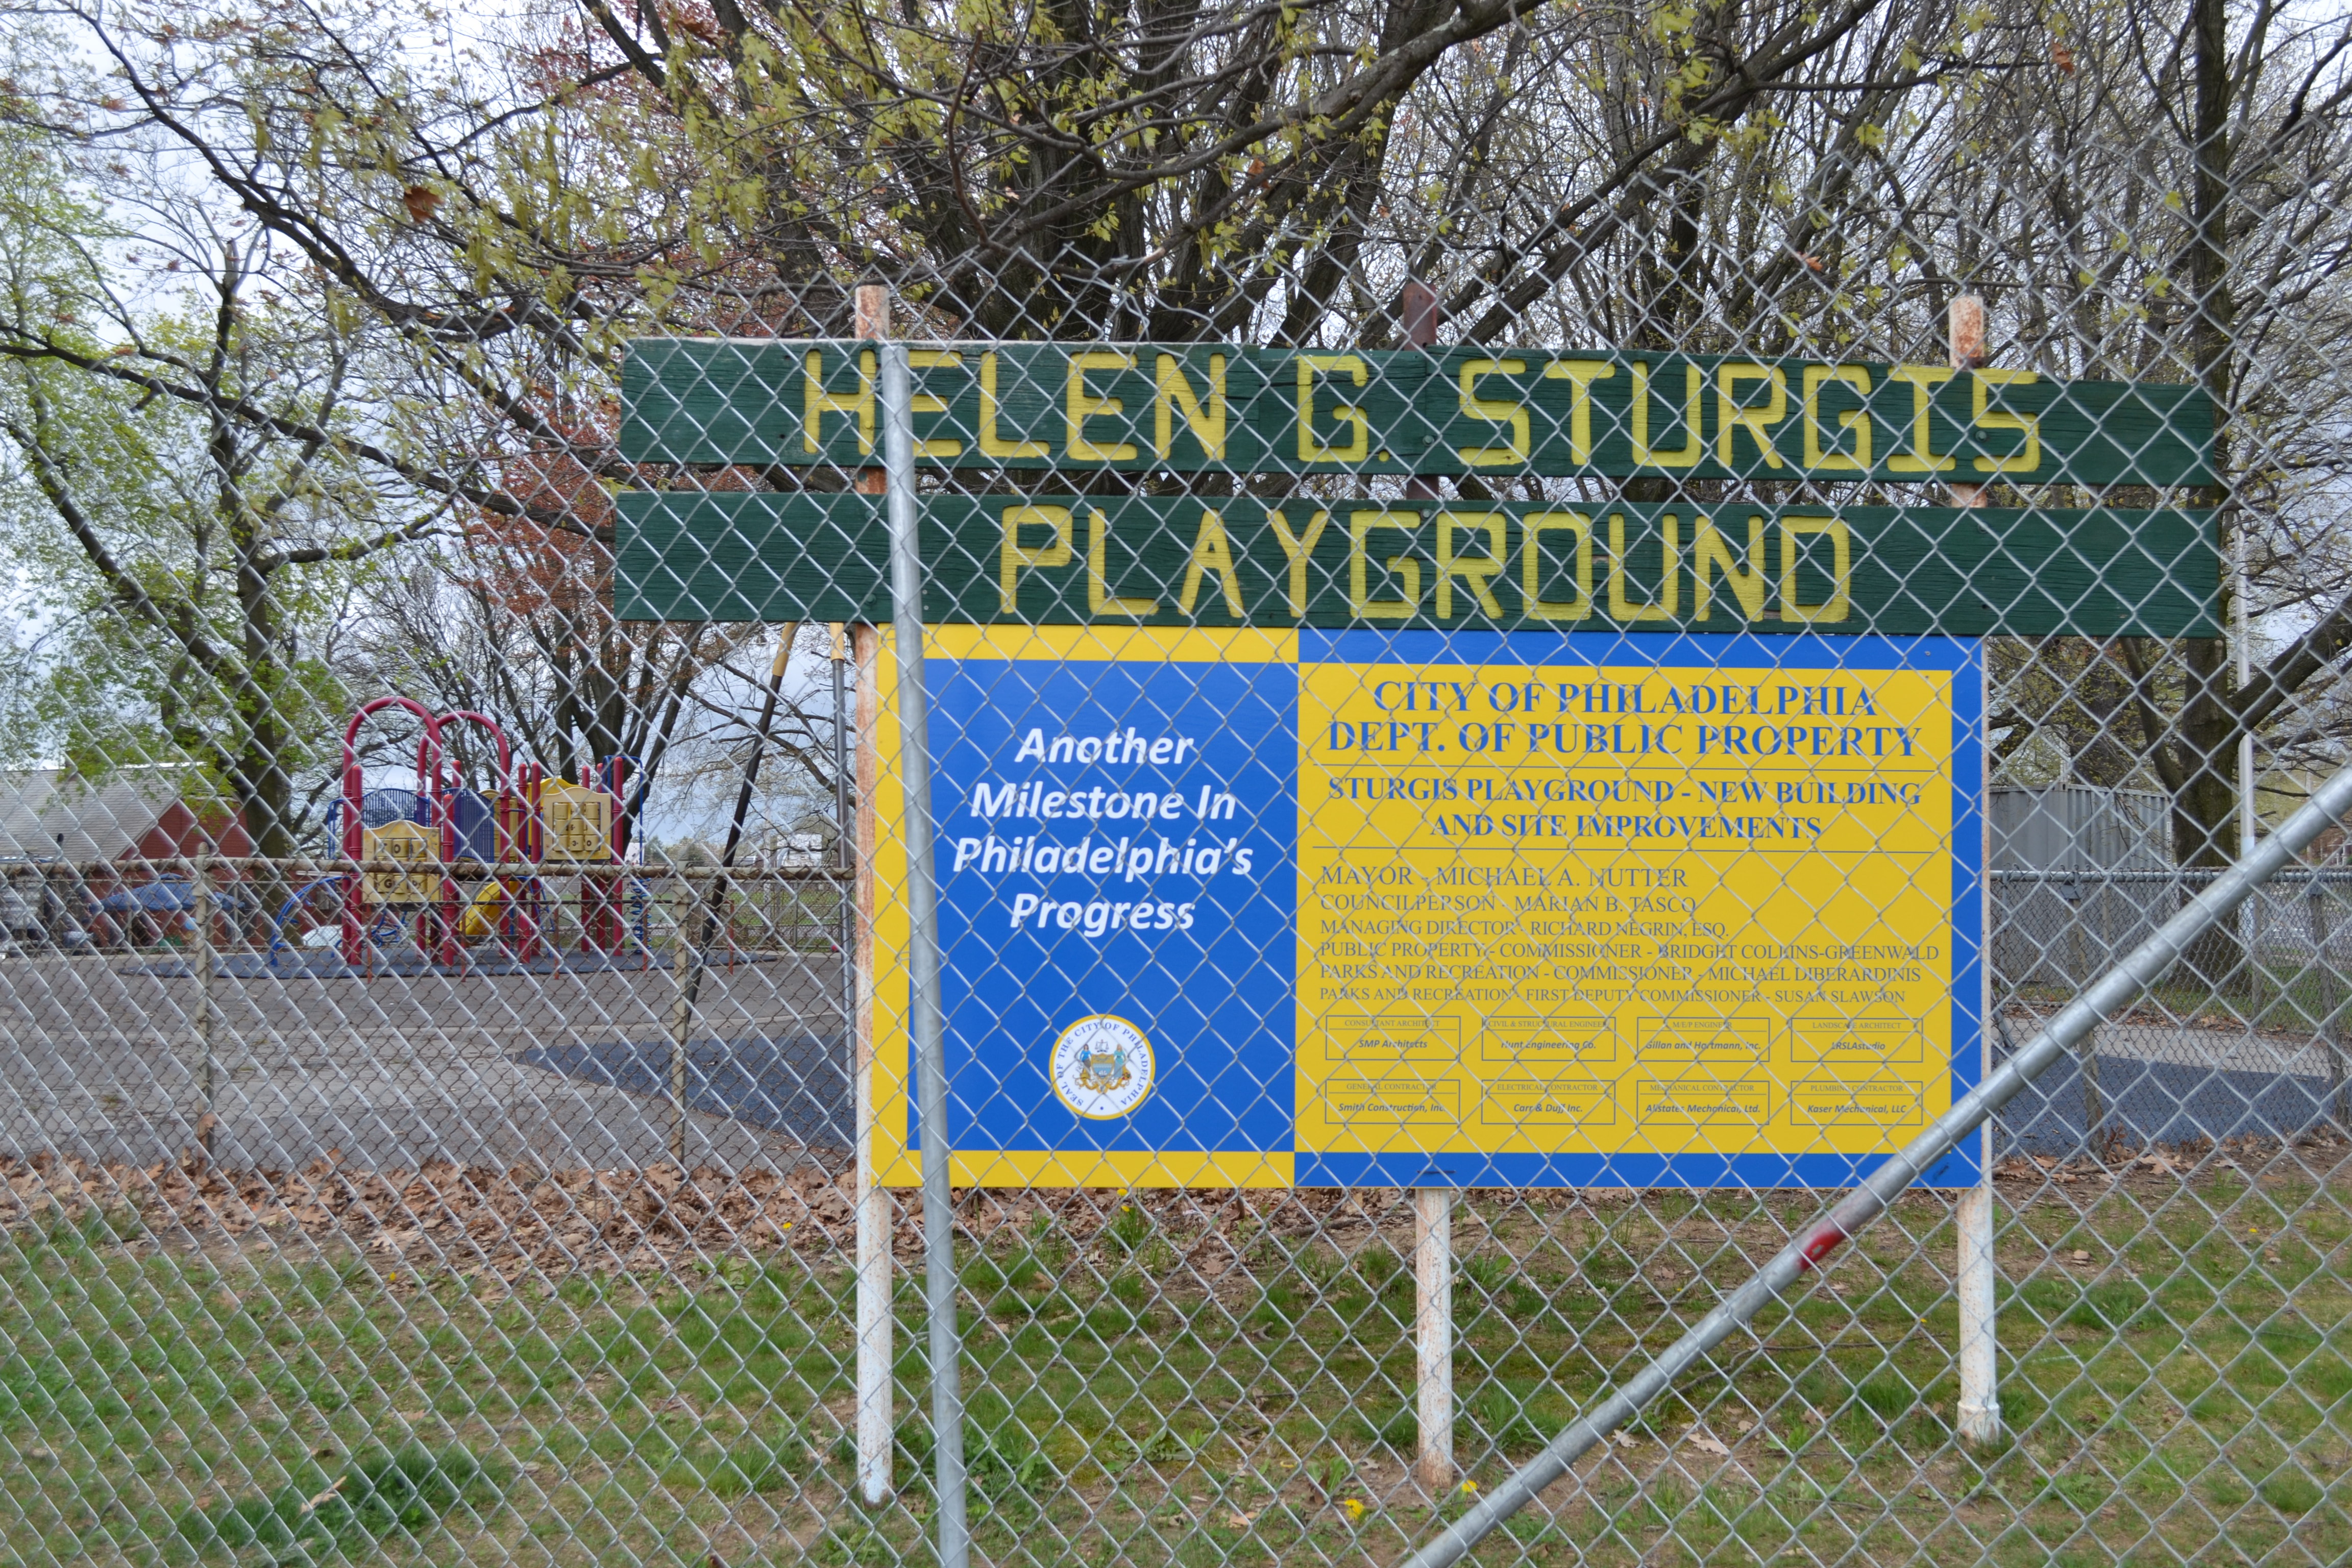 Project leaders broke ground on the Helen Sturgis Playground renovation